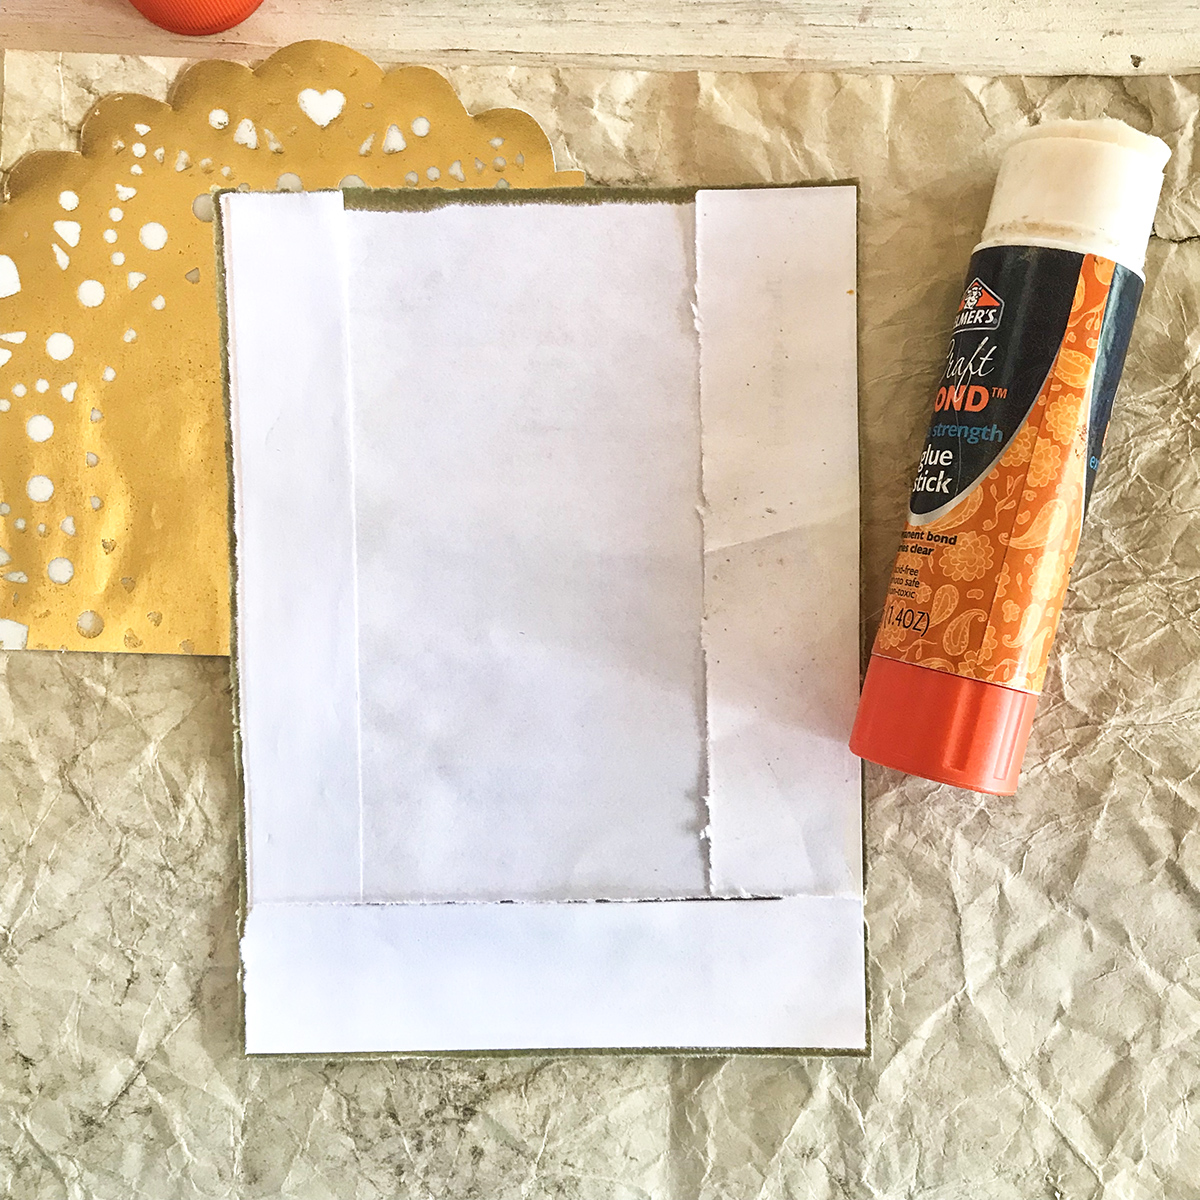 folding paper with gold doily and glue stick